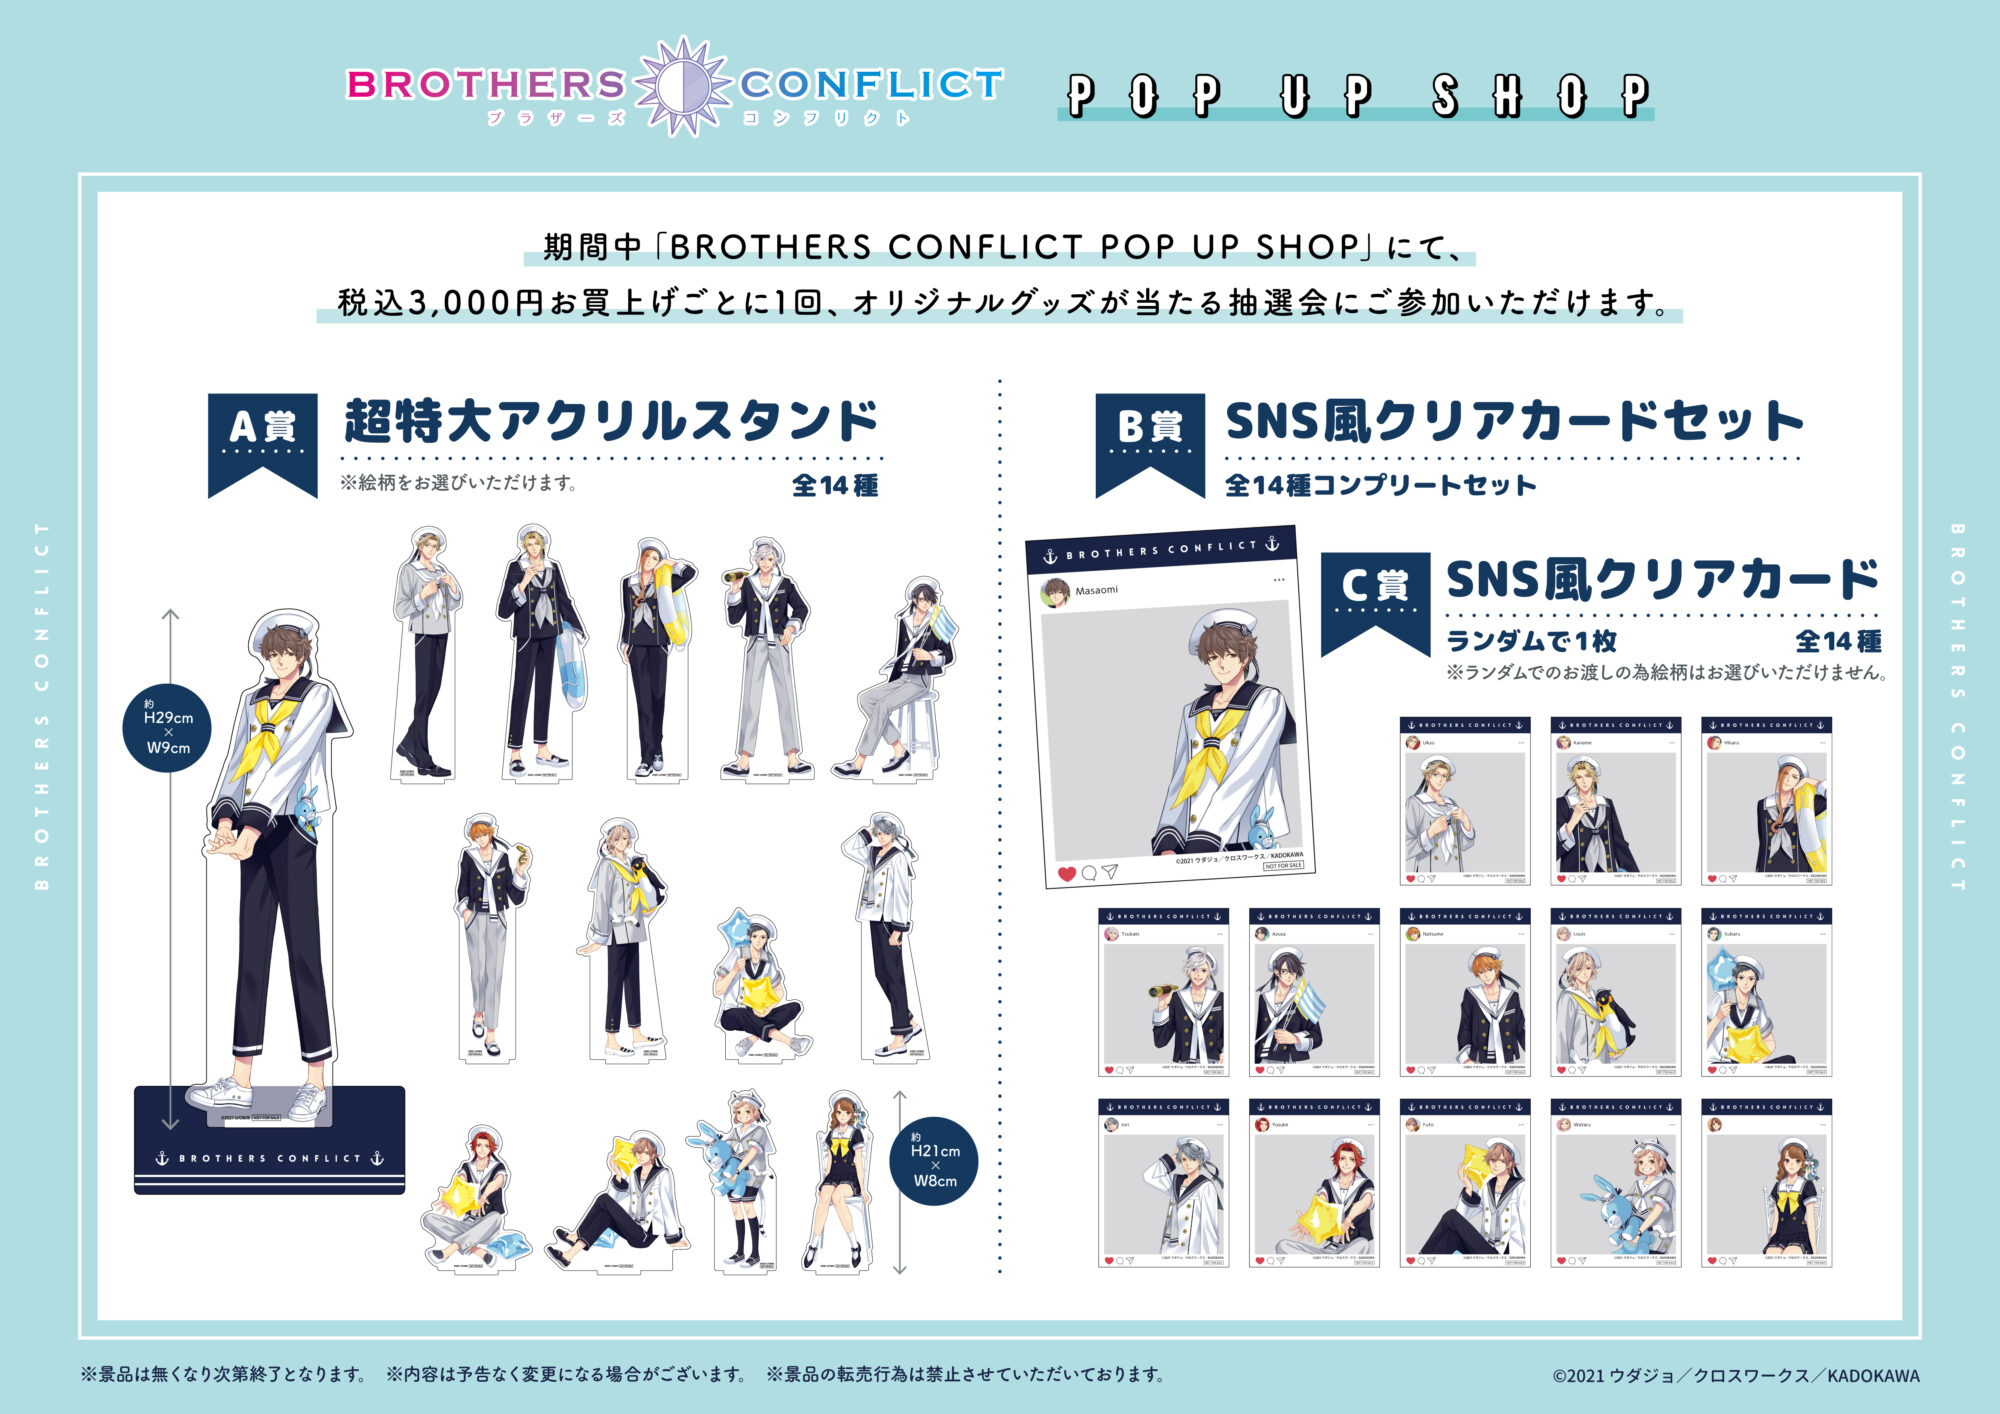 BROTHERS CONFLICT POP UP SHOP期間限定ショップがOPEN！ | 【THE